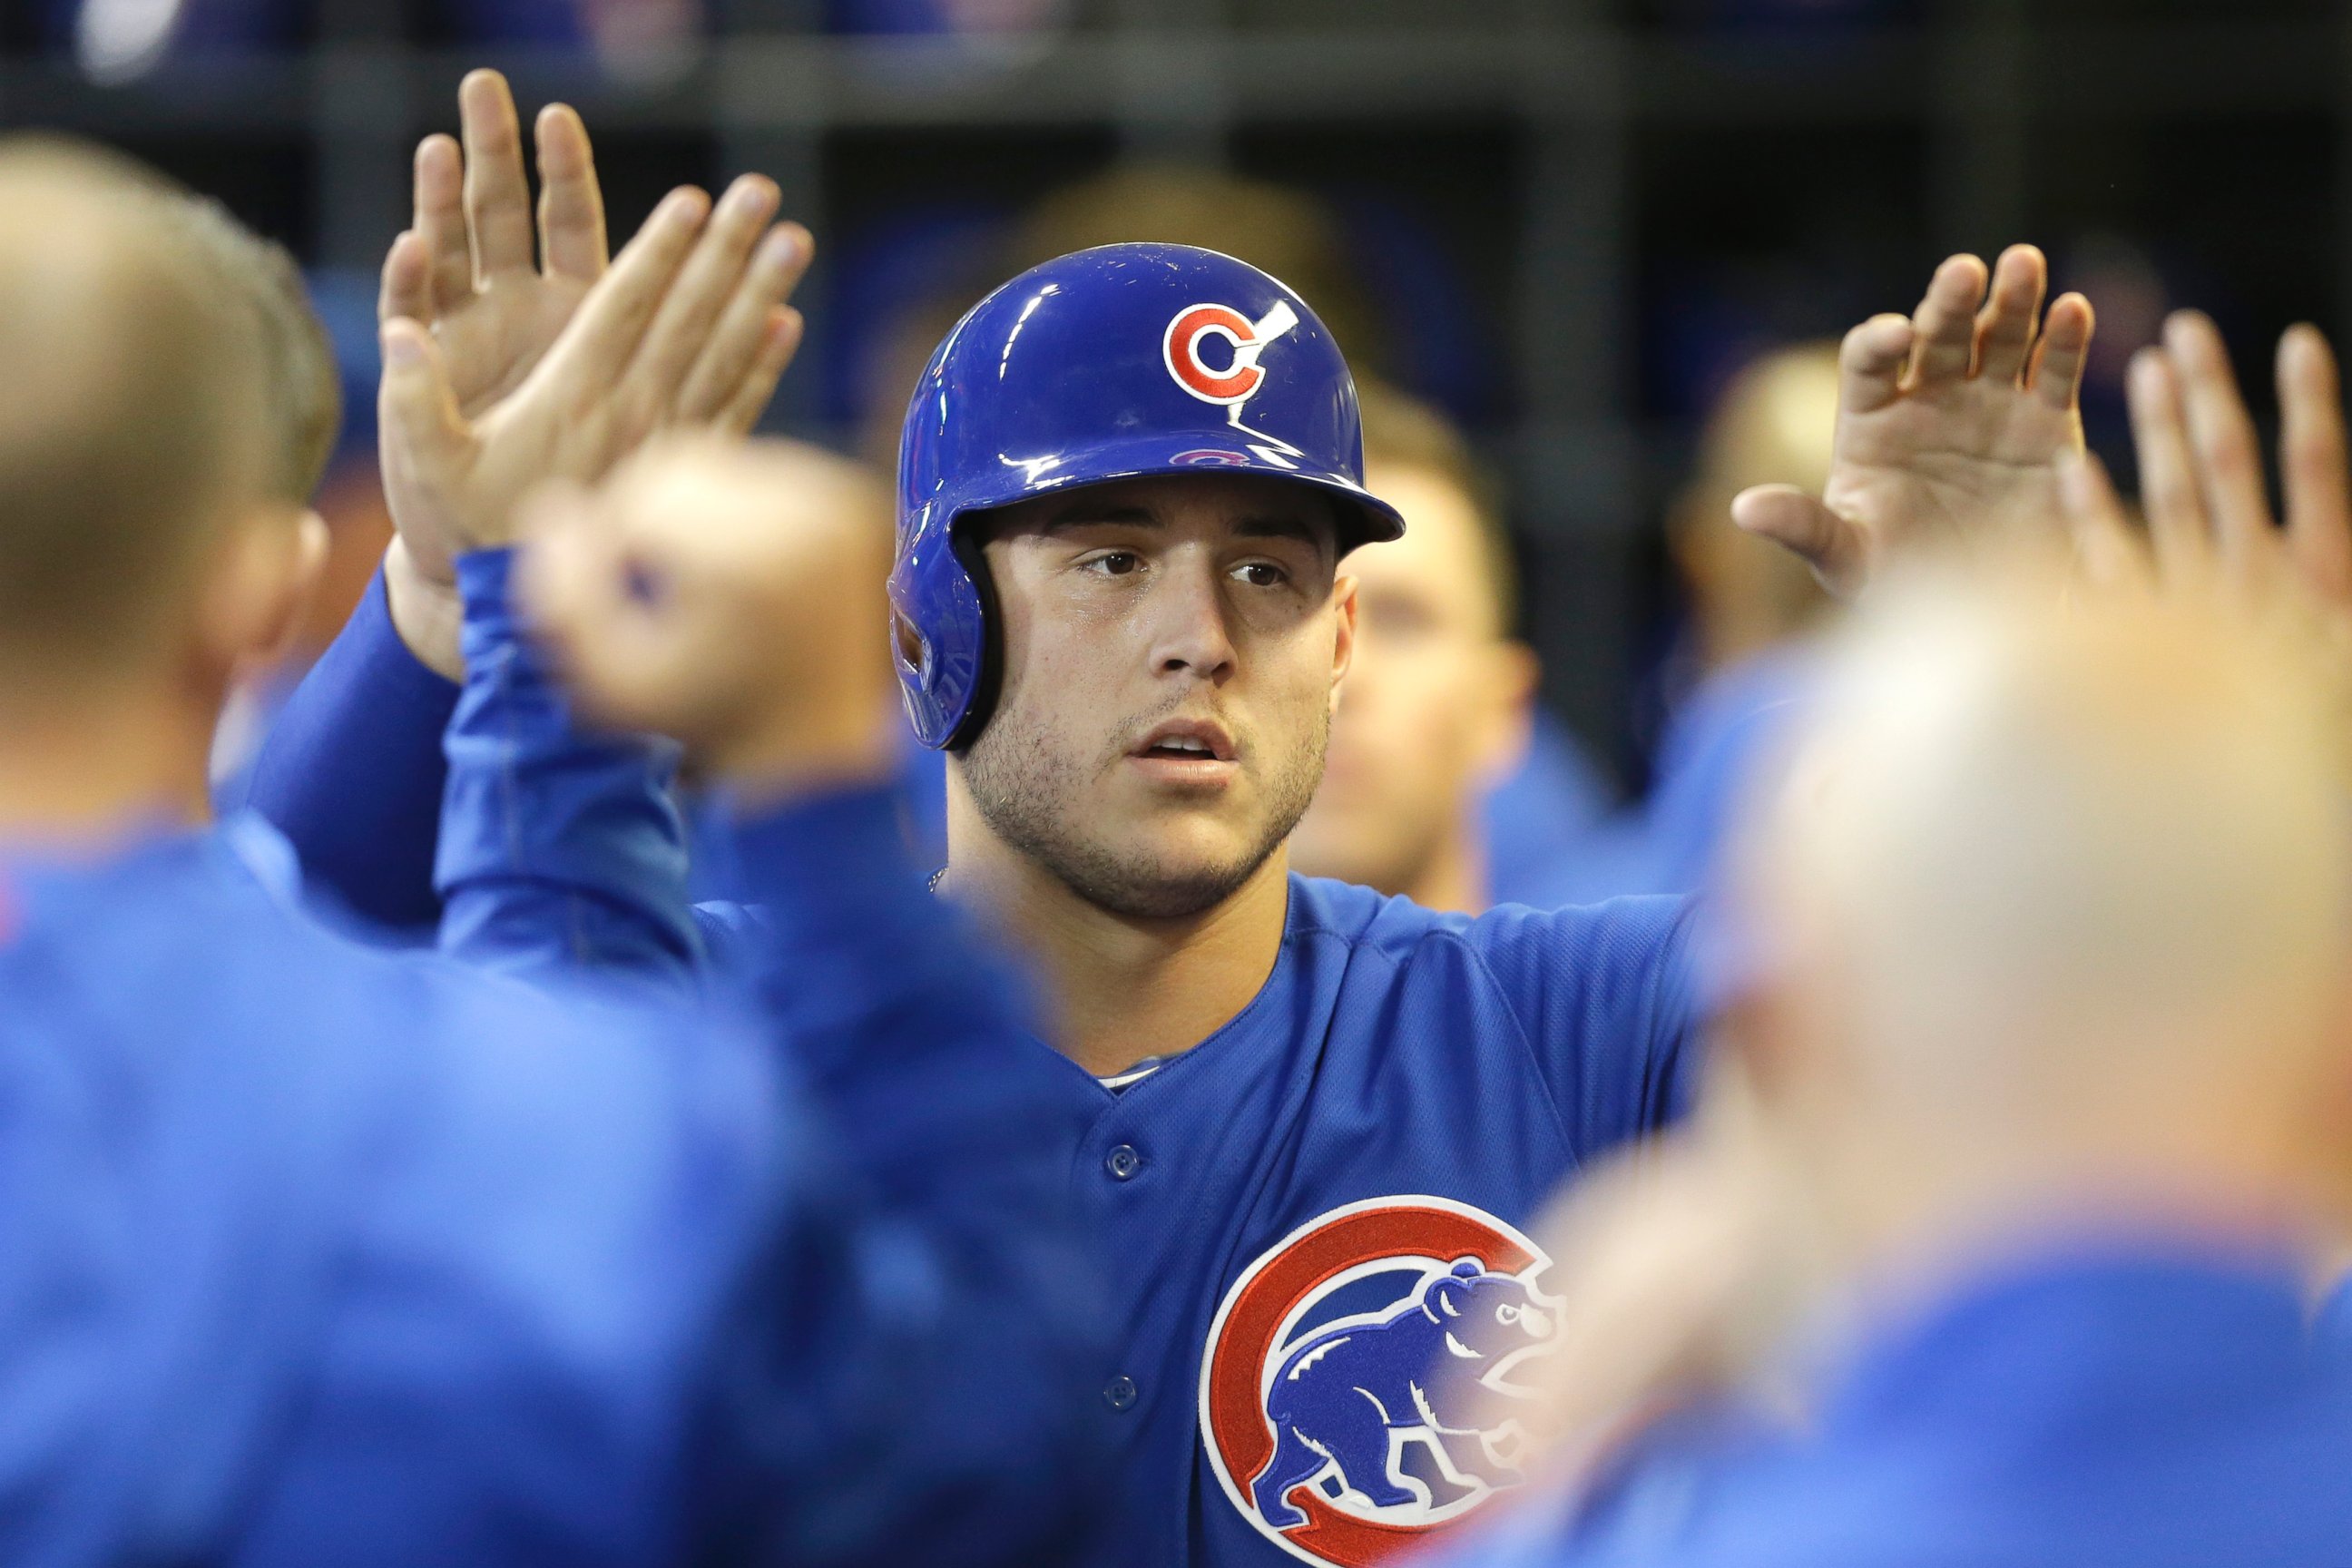 PHOTO: Anthony Rizzo #44 of the Chicago Cubs celebrates in the dugout after reaching on a double hit by Starlin Castro in the seventh inning against the Milwaukee Brewers at Miller Park on October 02, 2015 in Milwaukee, Wisconsin.